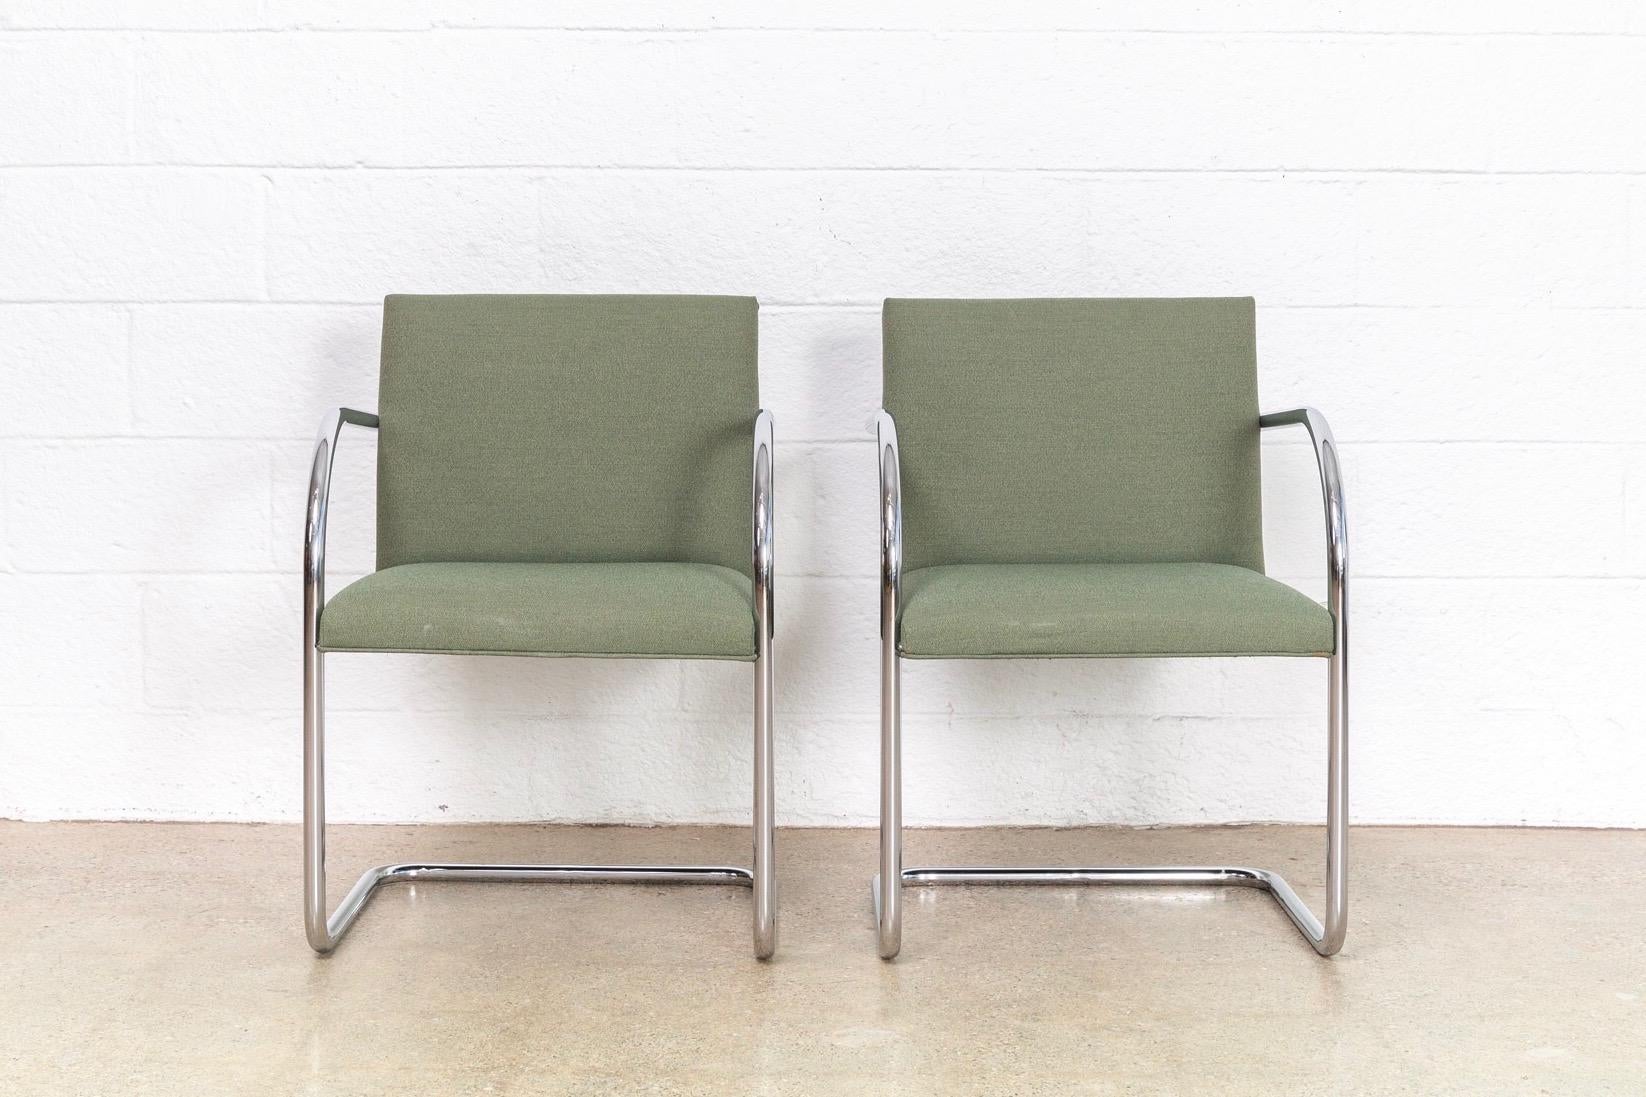 American Mies van der Rohe Green Brno Chrome Cantilever Dining Chairs, Set of 4 For Sale